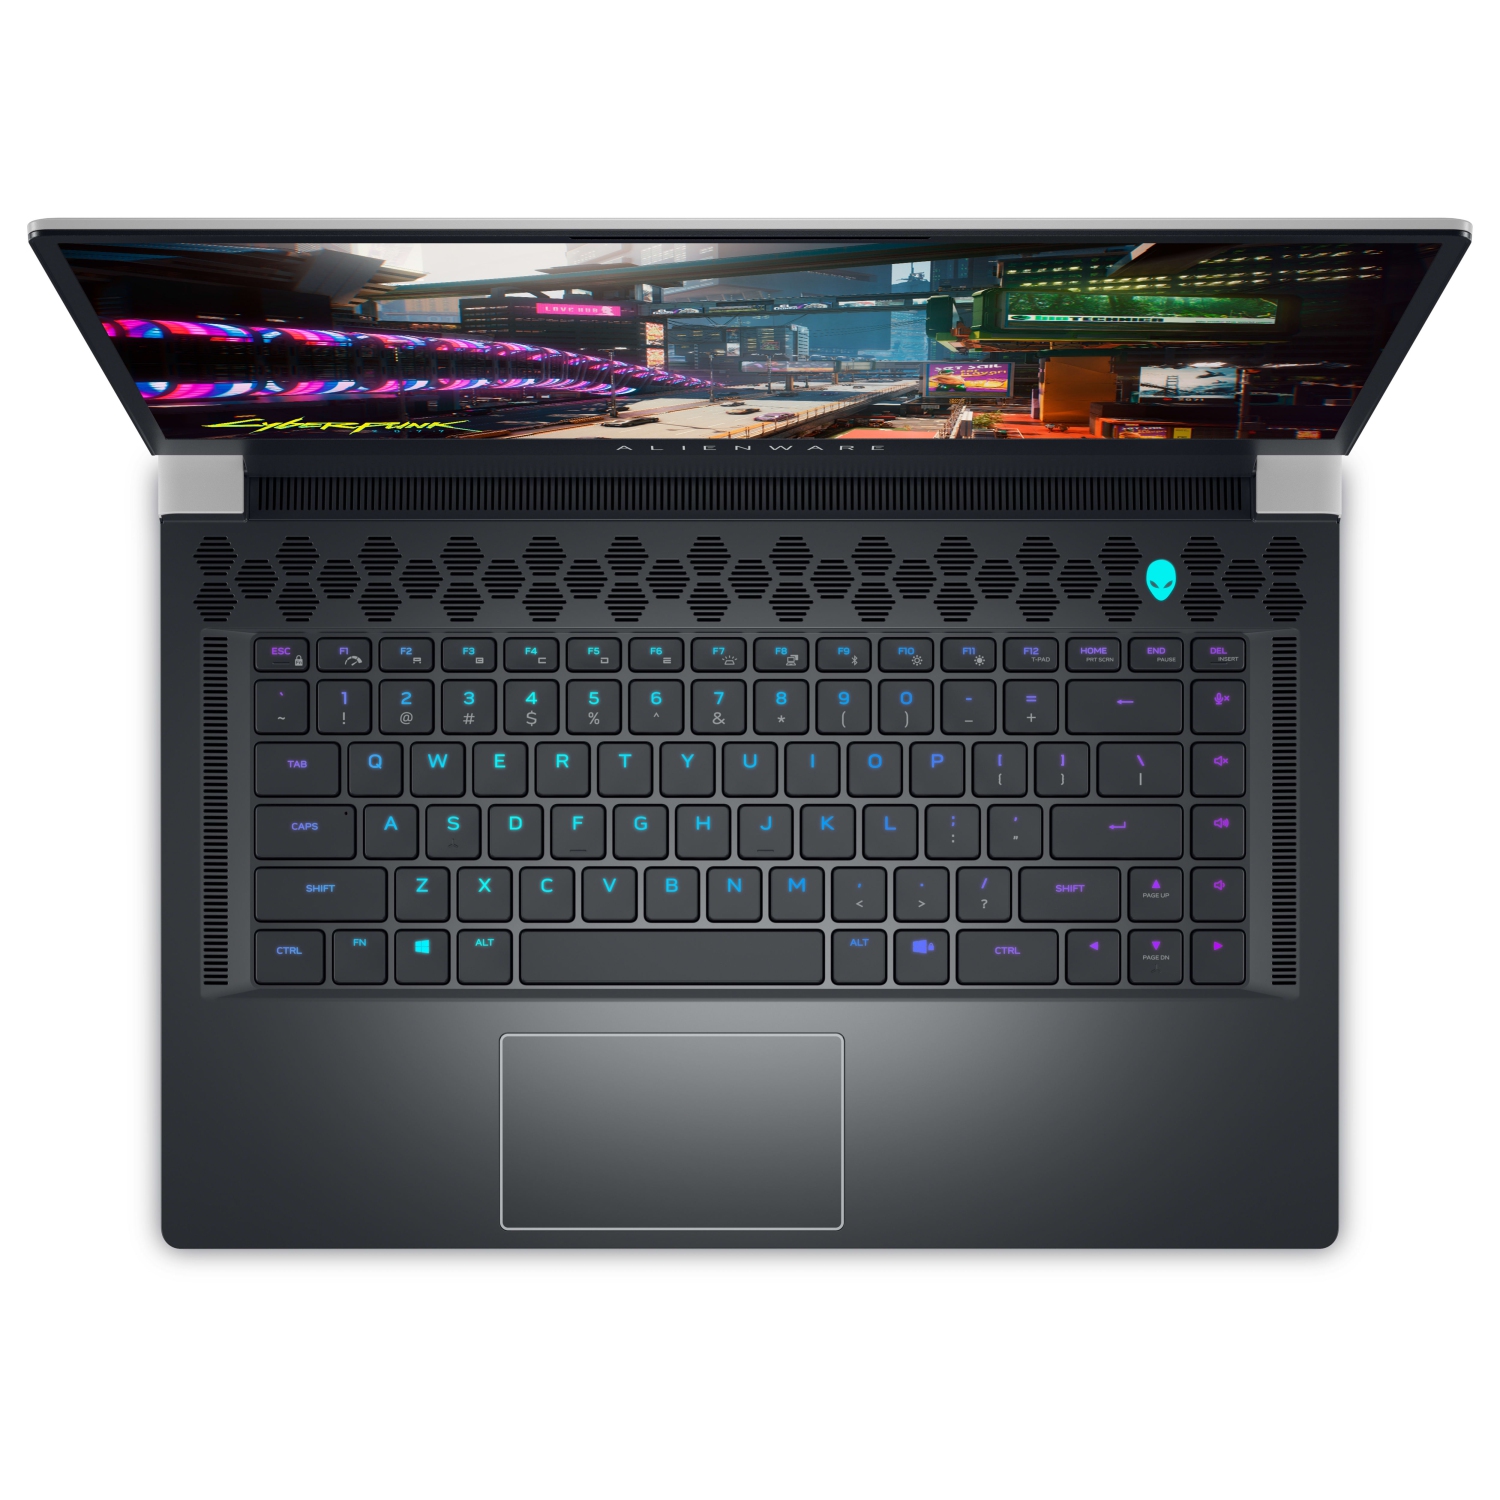 Refurbished (Excellent) – Dell Alienware X15 R2 Gaming Laptop (2022) | 15.6" FHD | Core i9 - 2TB SSD - 32GB RAM - RTX 3080 | 14 Cores @ 5 GHz - 12th Gen CPU - 8GB GDDR6X